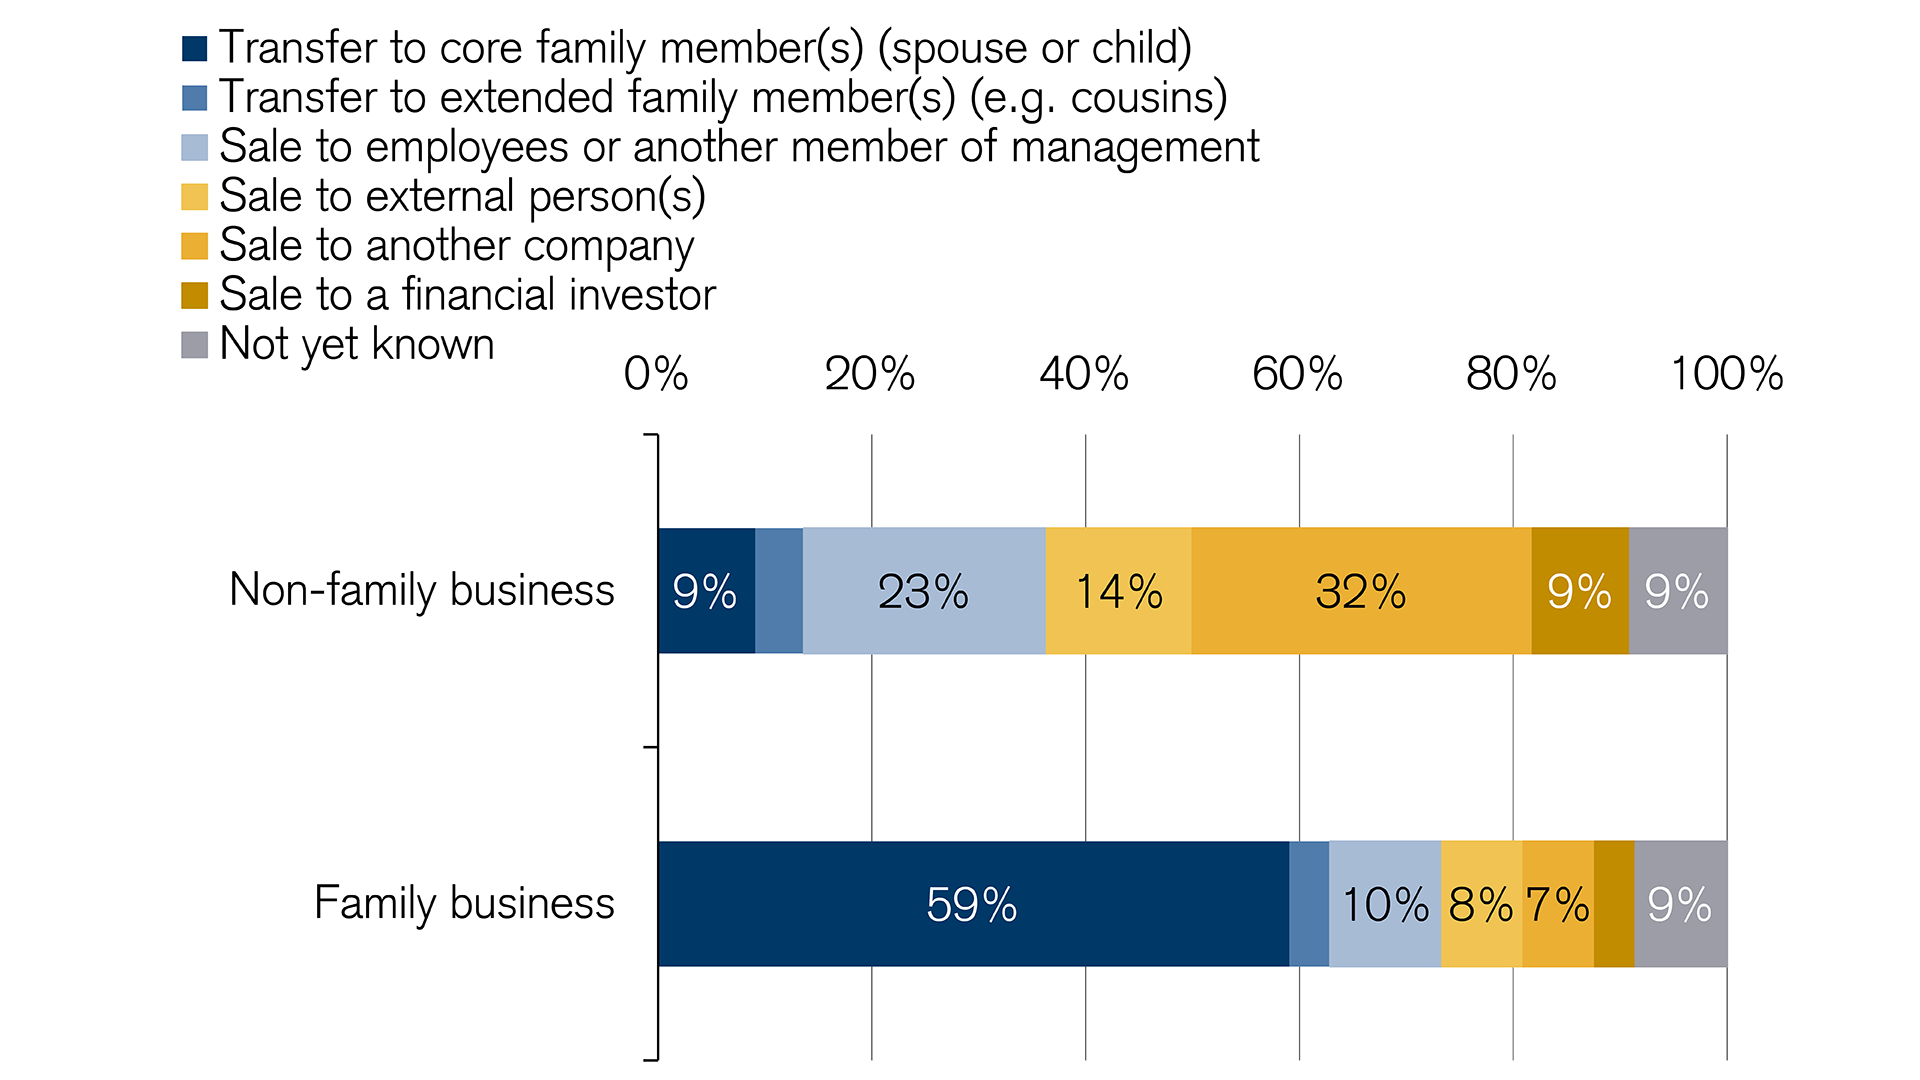 Family-owned companies prefer corporate succession by family members